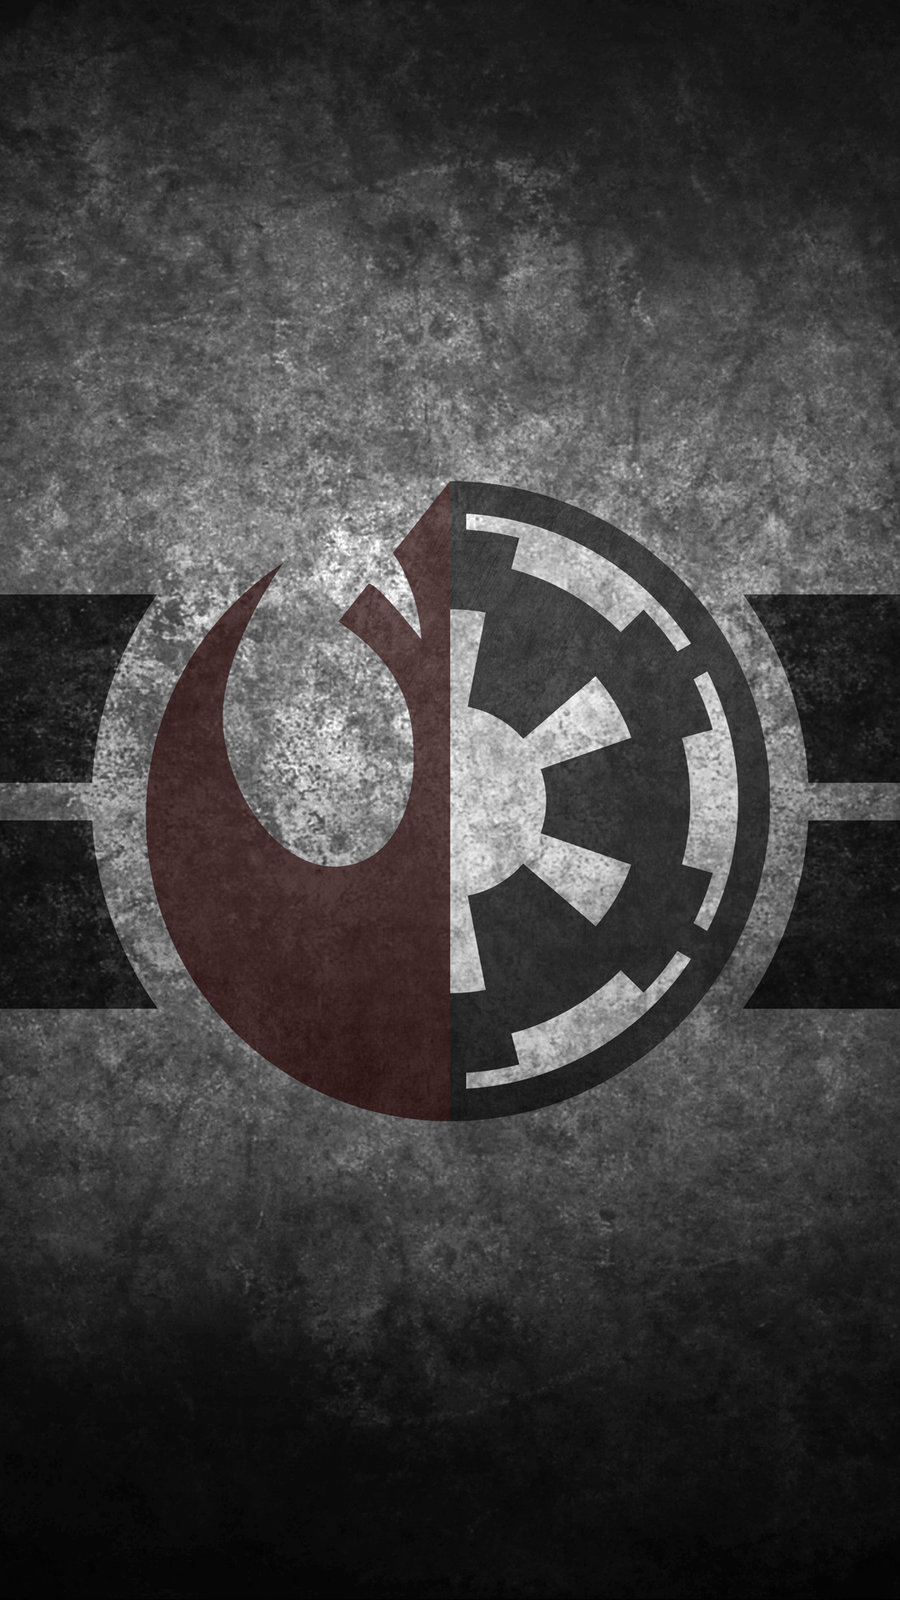 Star Wars Divided Allegiance Cellphone Wallpaper by swmand4 on